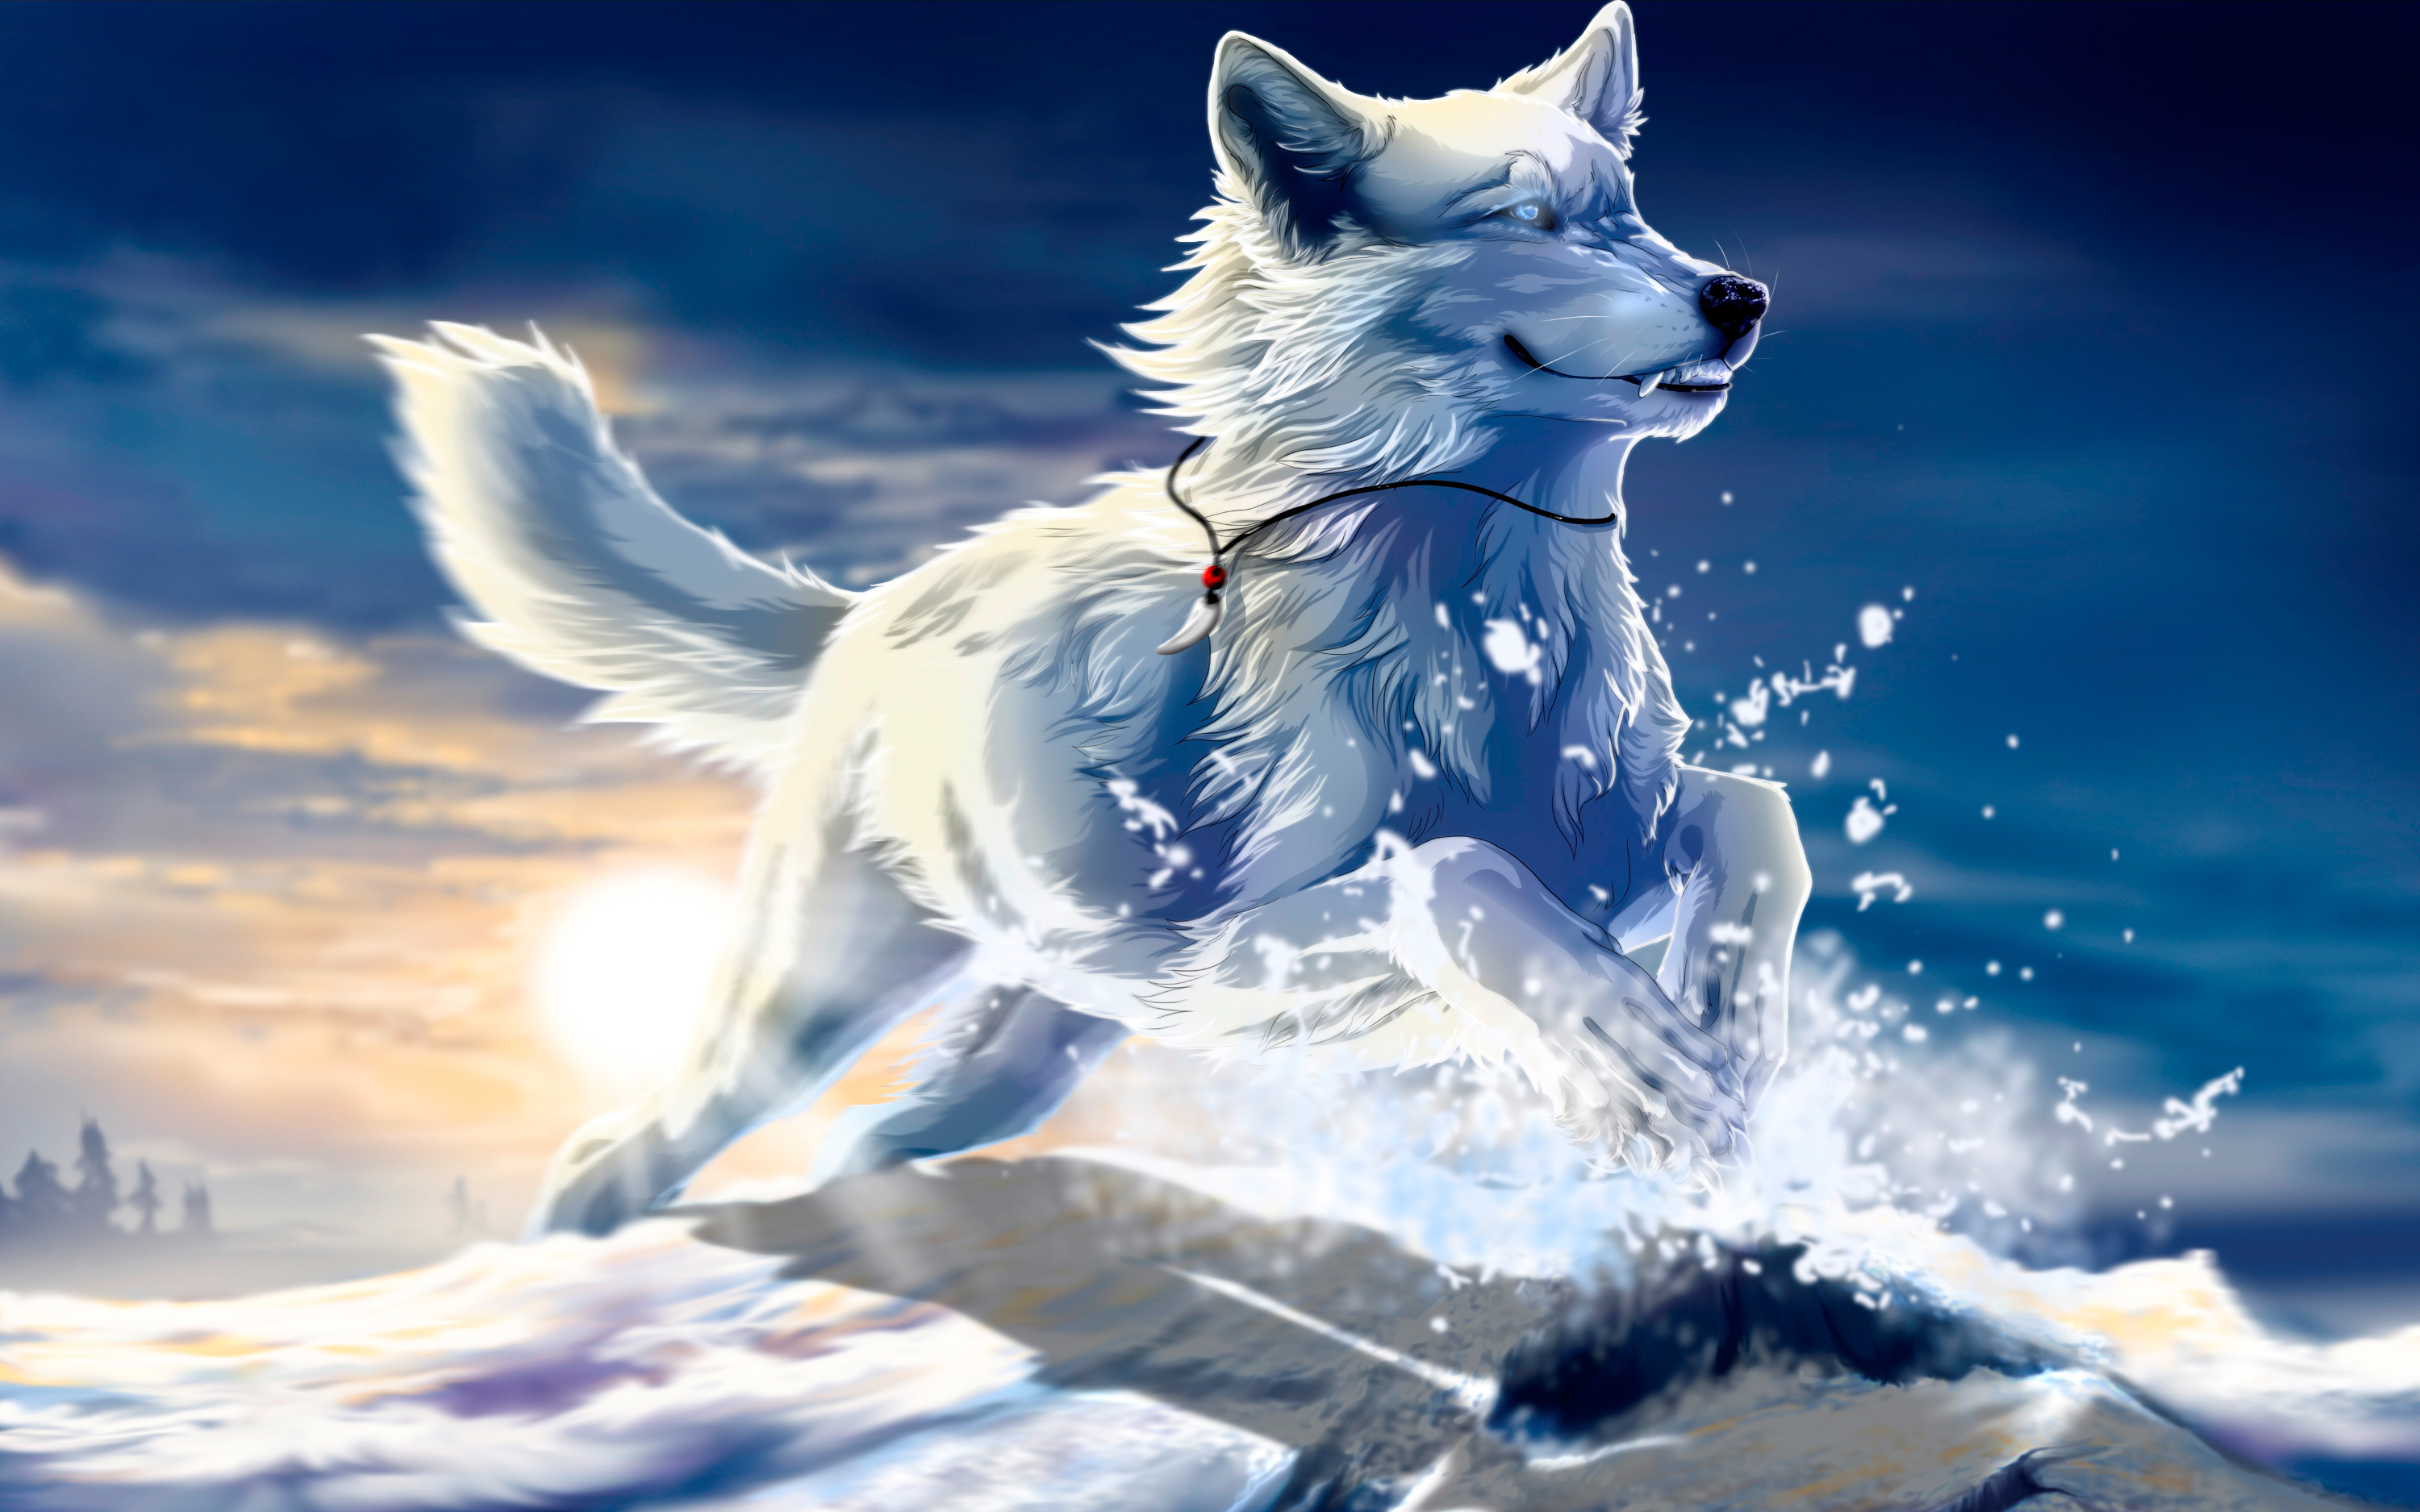 Free Download Cool Anime Wolf Wallpapers 3000x1875 For Your Desktop Mobile Tablet Explore 92 Anime Wolves Wallpapers Anime Wolves Wallpapers Wolves Backgrounds Wolves Wallpaper Wolf wallpapers, backgrounds, images 1920x1080— best wolf desktop wallpaper sort wallpapers by: cool anime wolf wallpapers 3000x1875